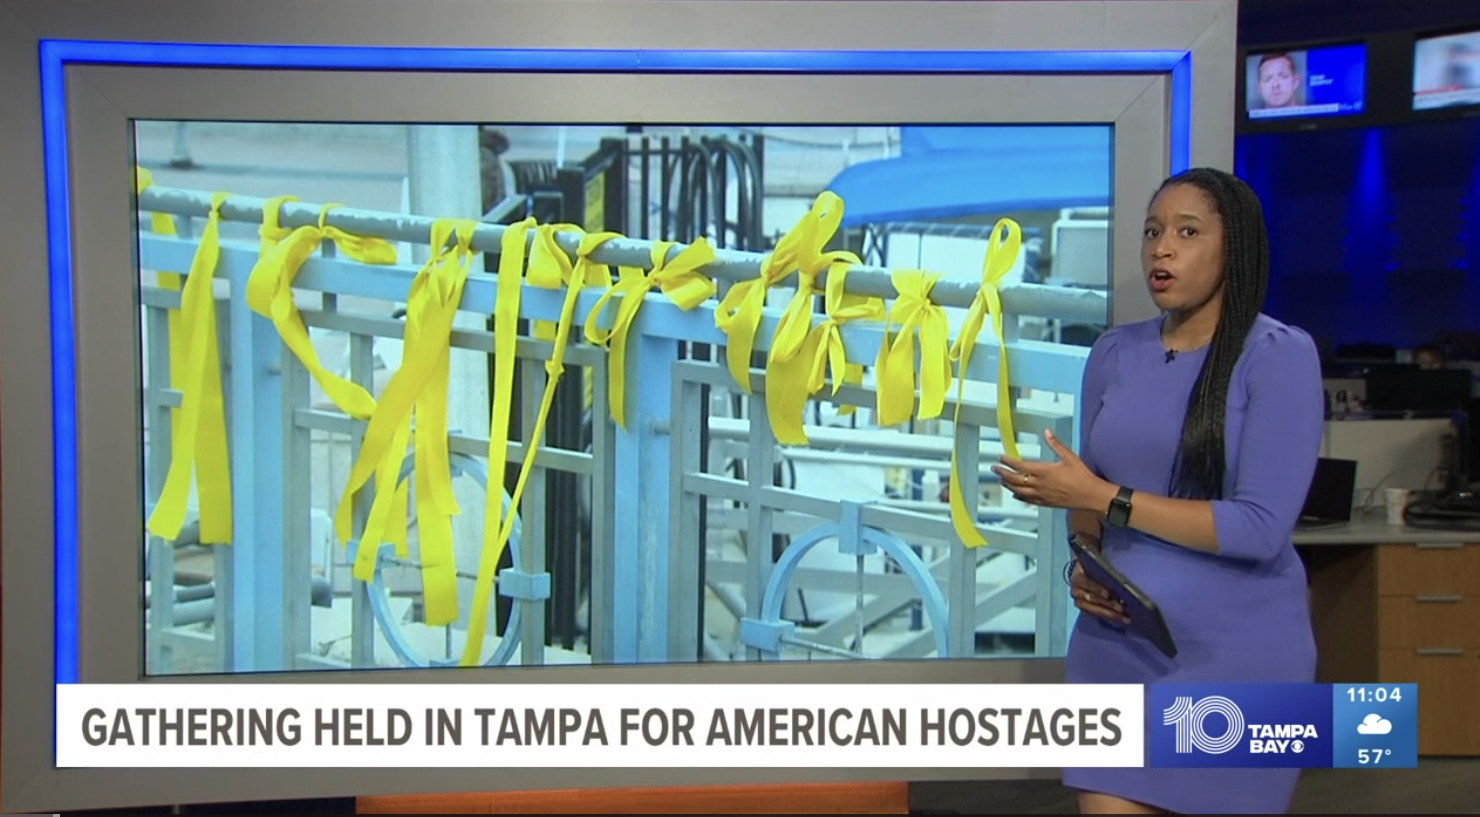 10 Tampa Bay- People rally in Tampa to remember American hostages still in limbo in Gaza